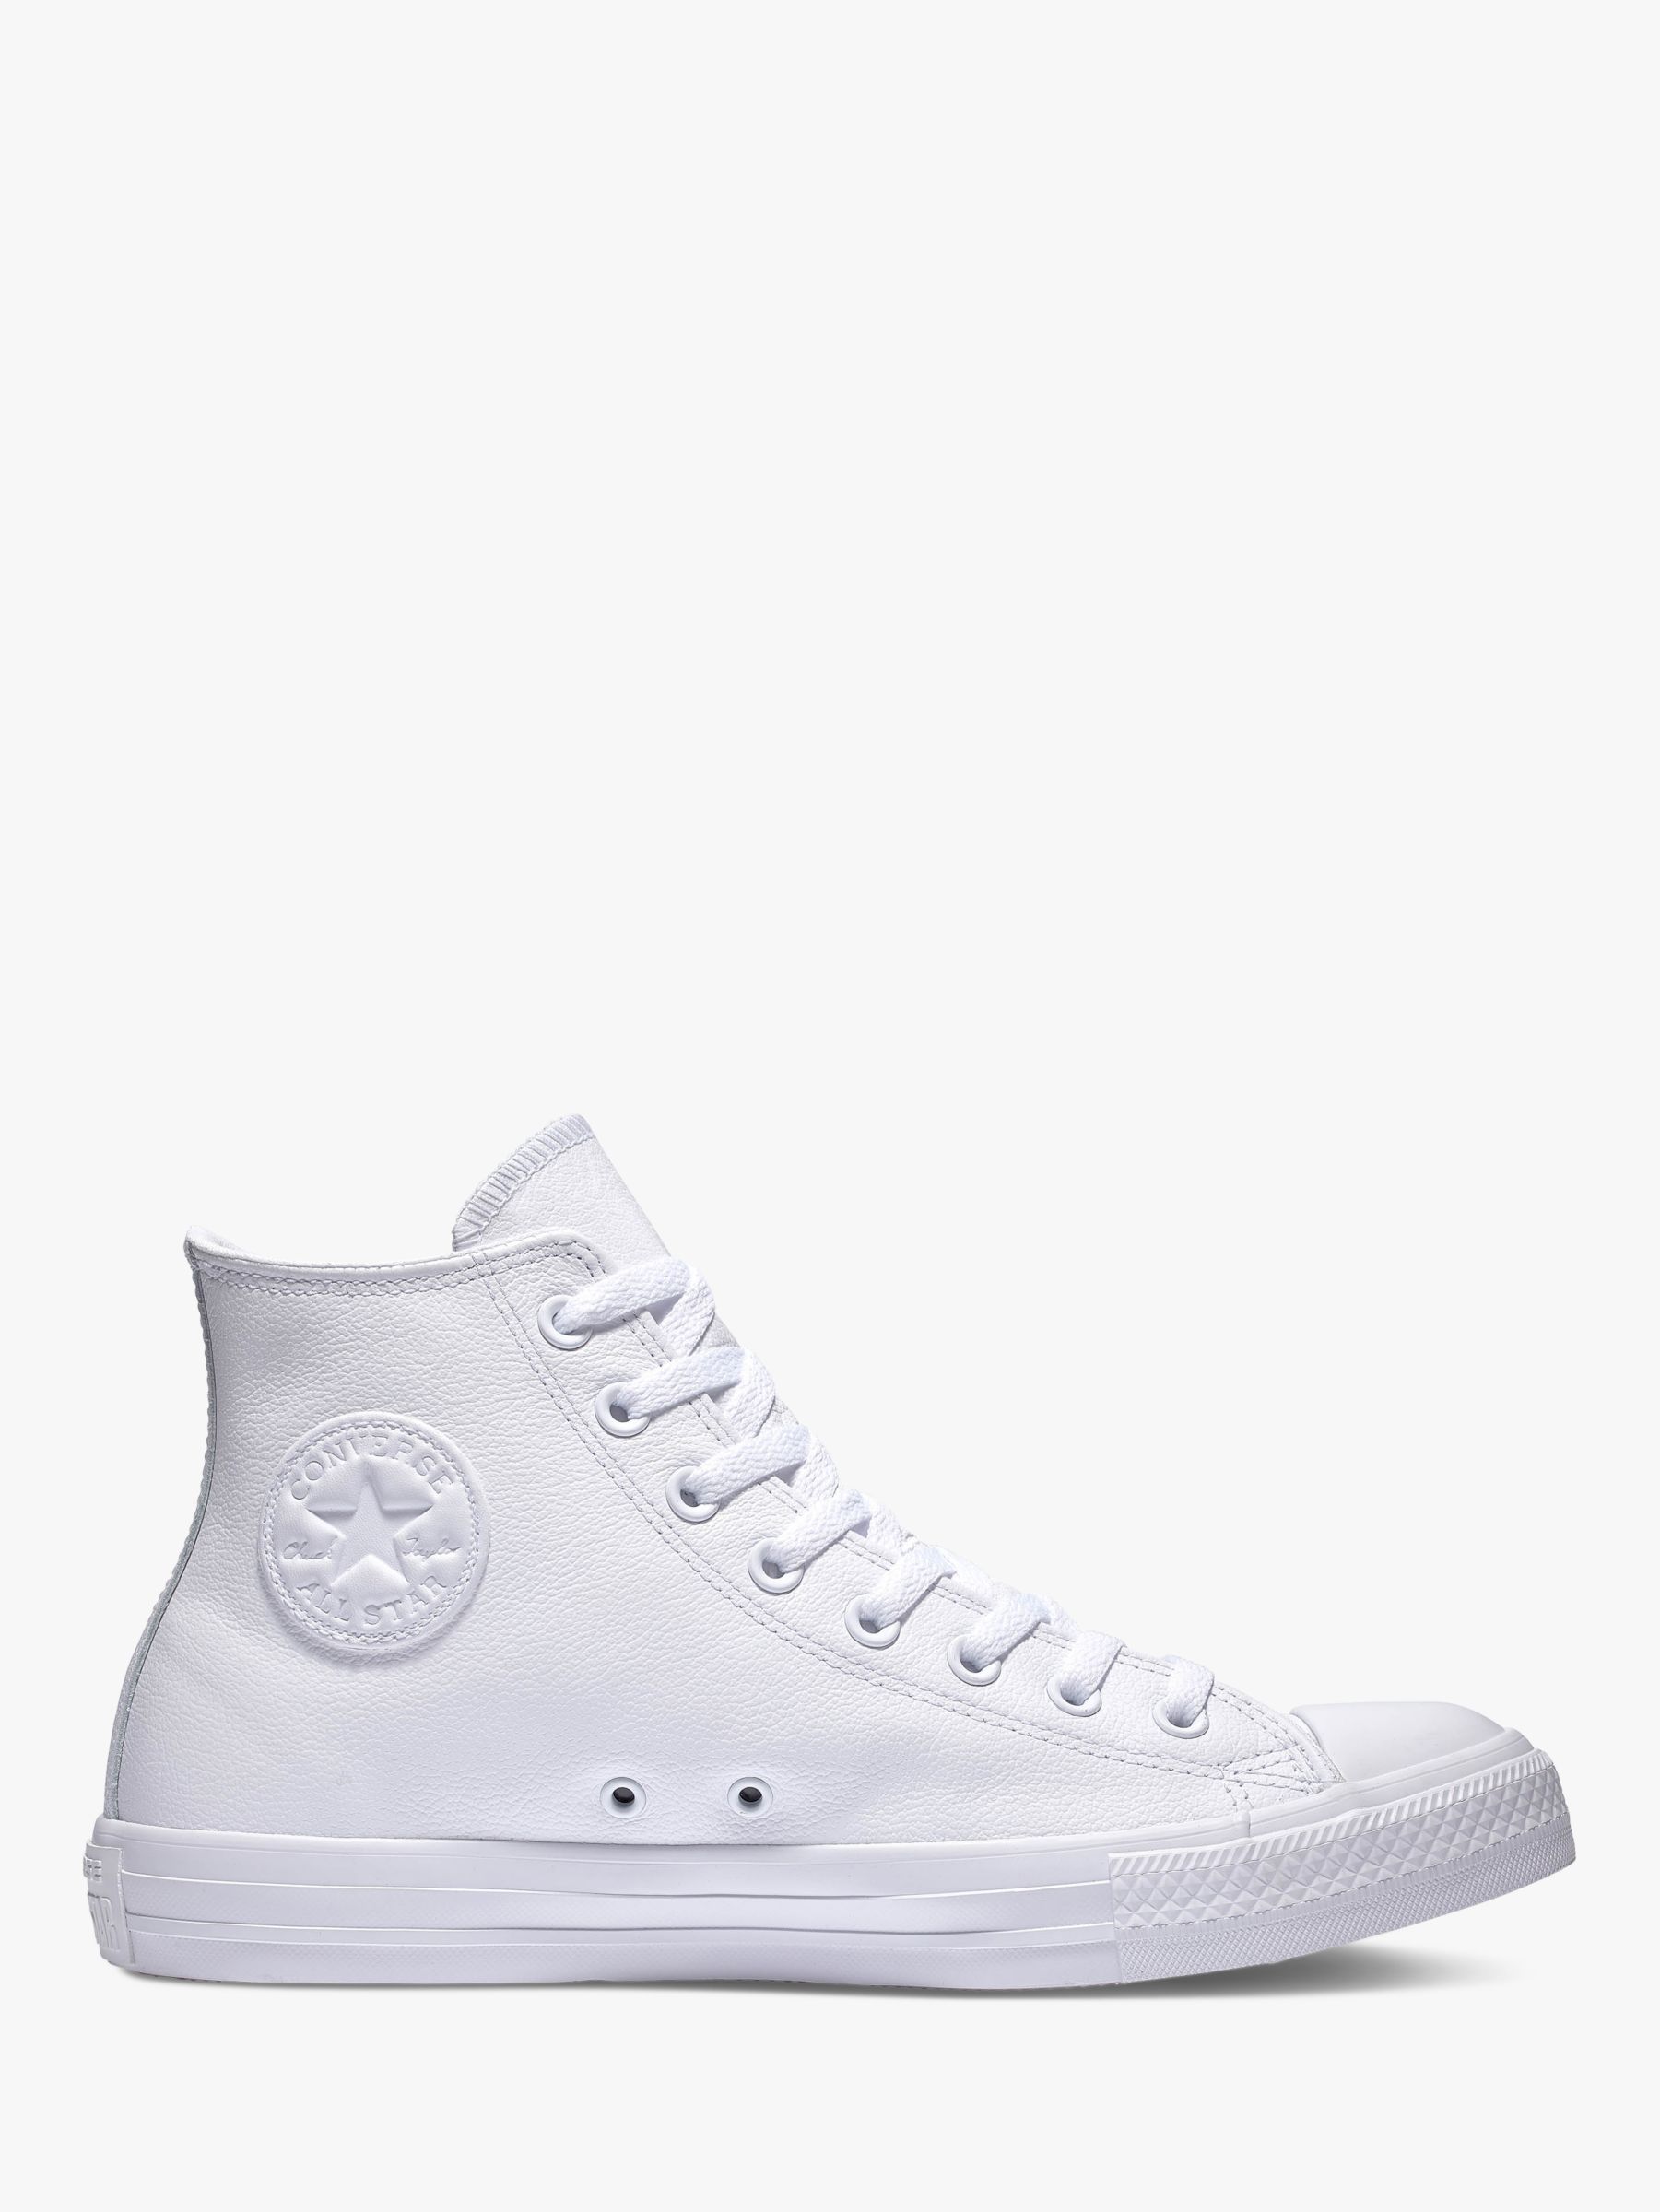 mens white leather converse